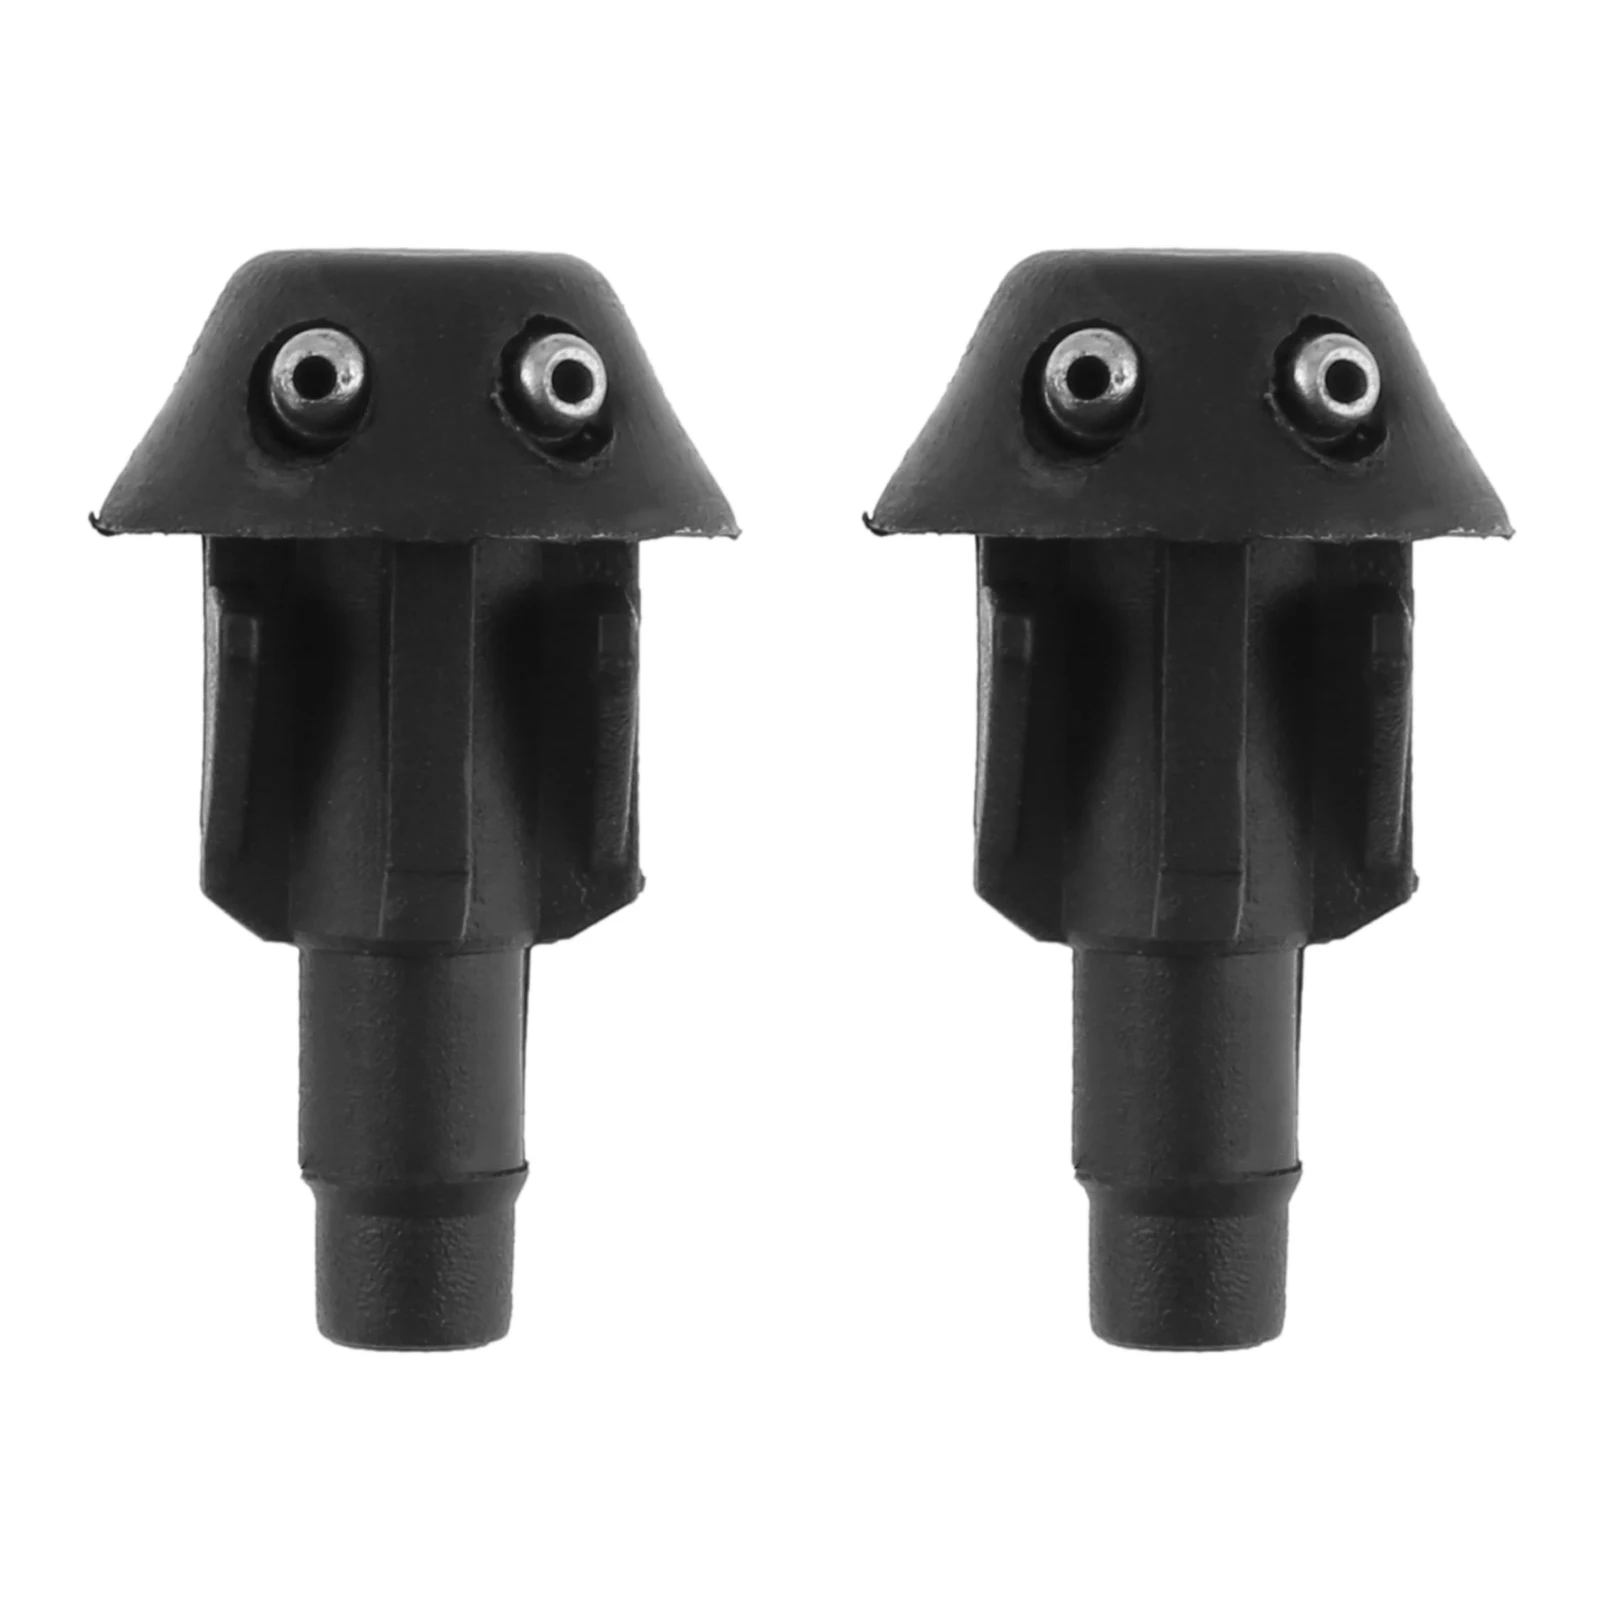 

2Pcs Car Front Windscreen Wiper Washer Jet Nozzles Window Windshield Water Spray For Peugeot 106 205 206 306 506 ABS Plastic